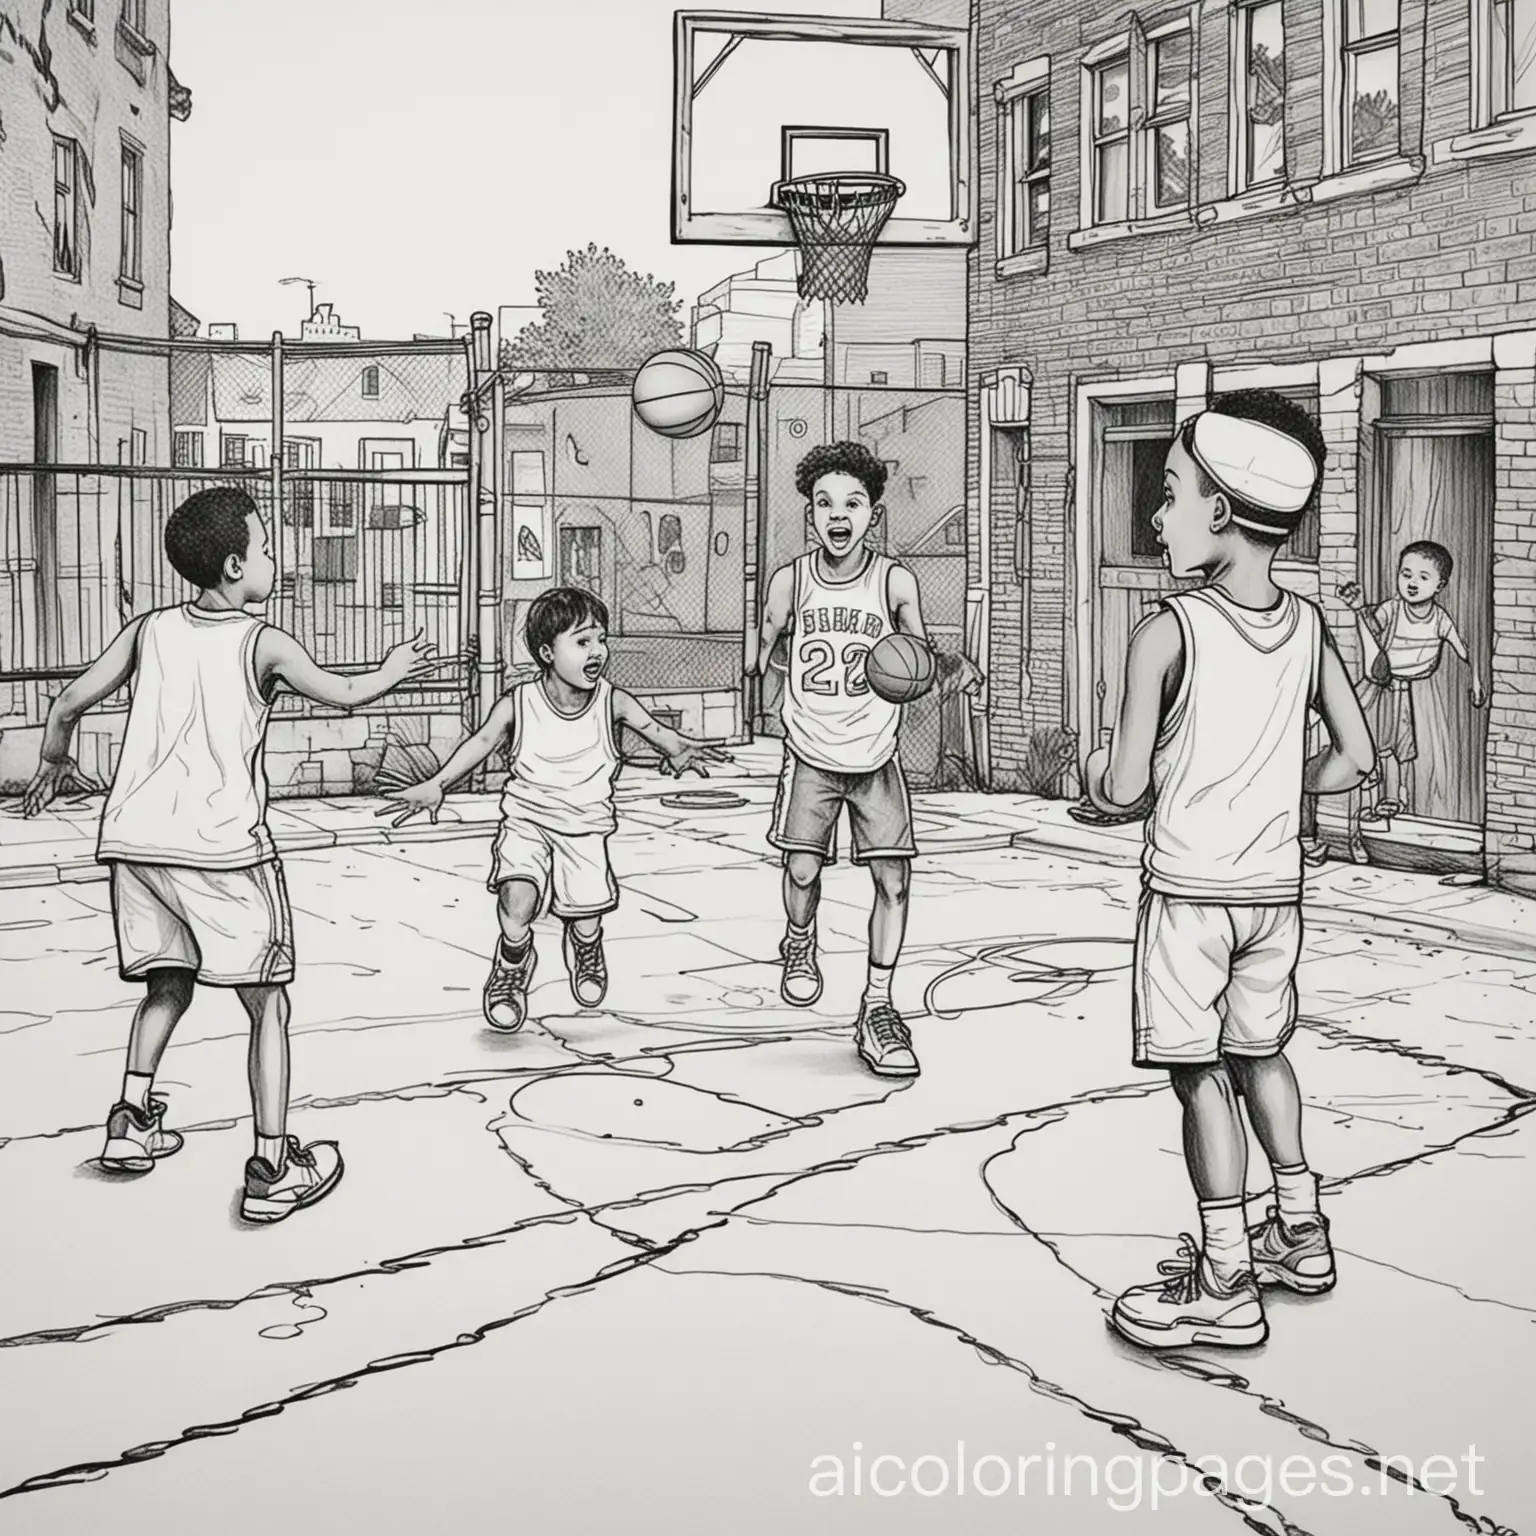 Energetic-Youth-Basketball-Game-in-Boston-Ghetto-Coloring-Page-for-Kids